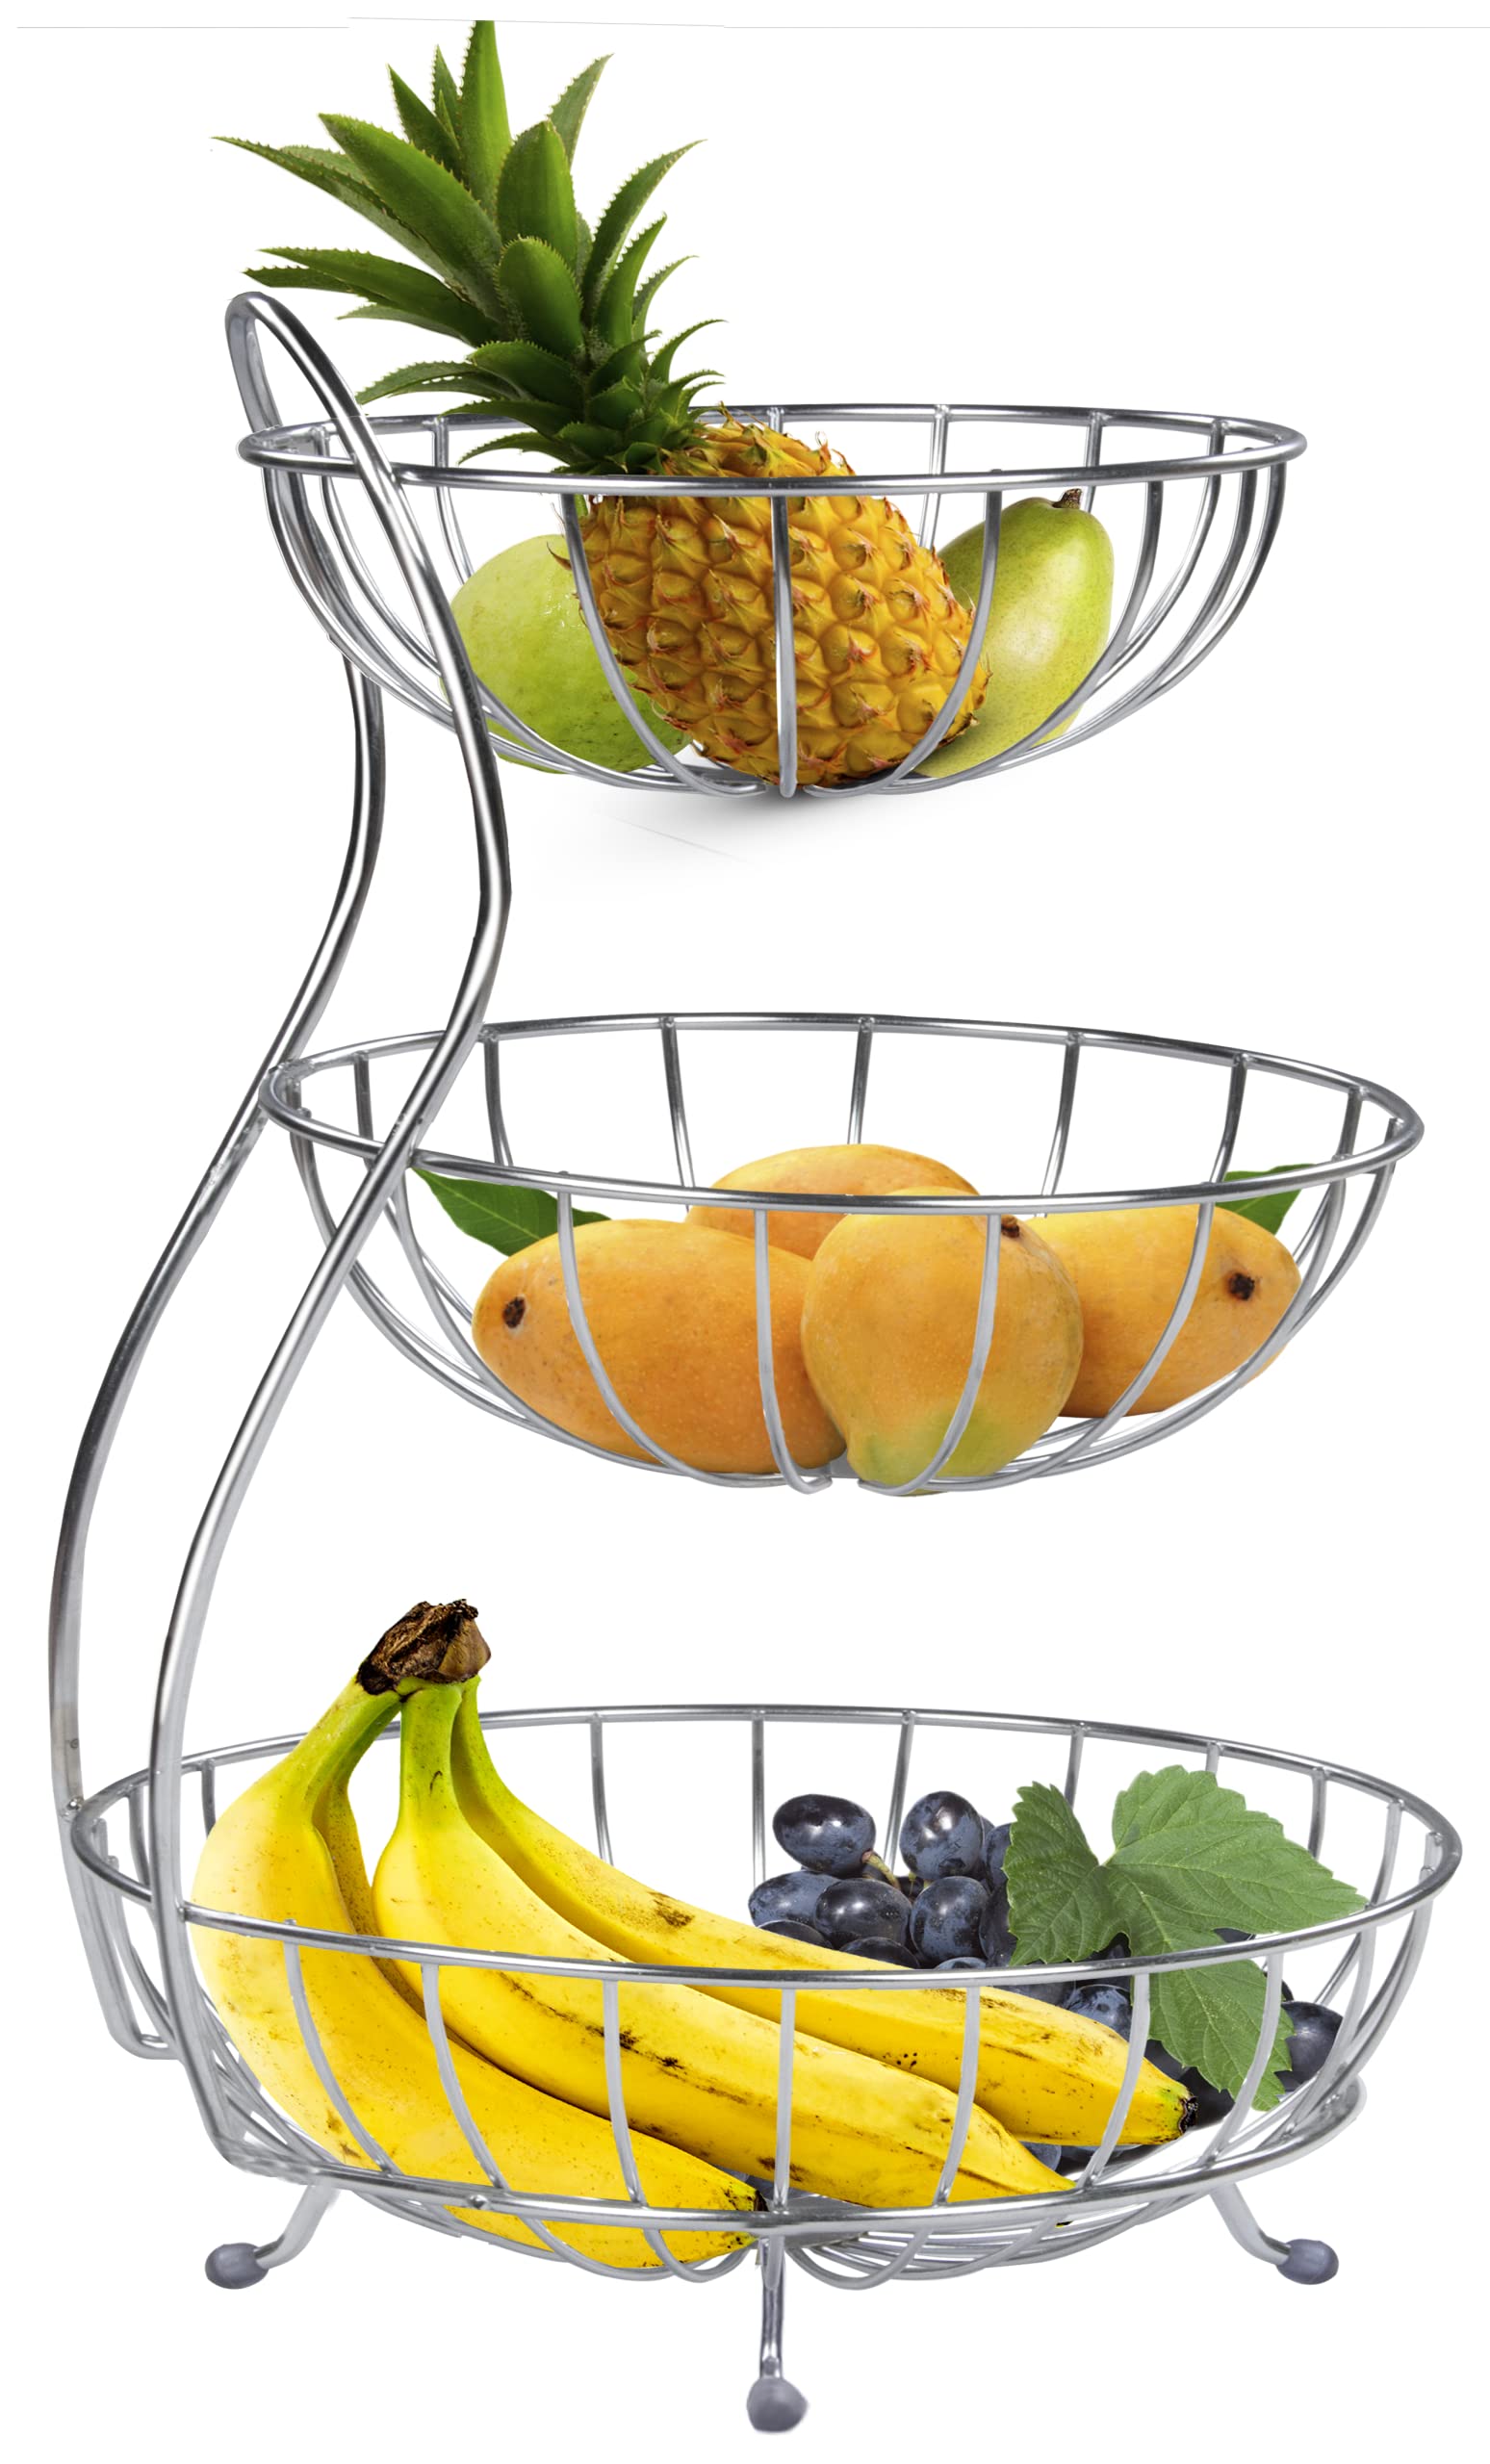 Plantex Stainless Steel 3-Tier Fruit & Vegetable Basket for Dining Table/Kitchen - Countertop (Chrome)